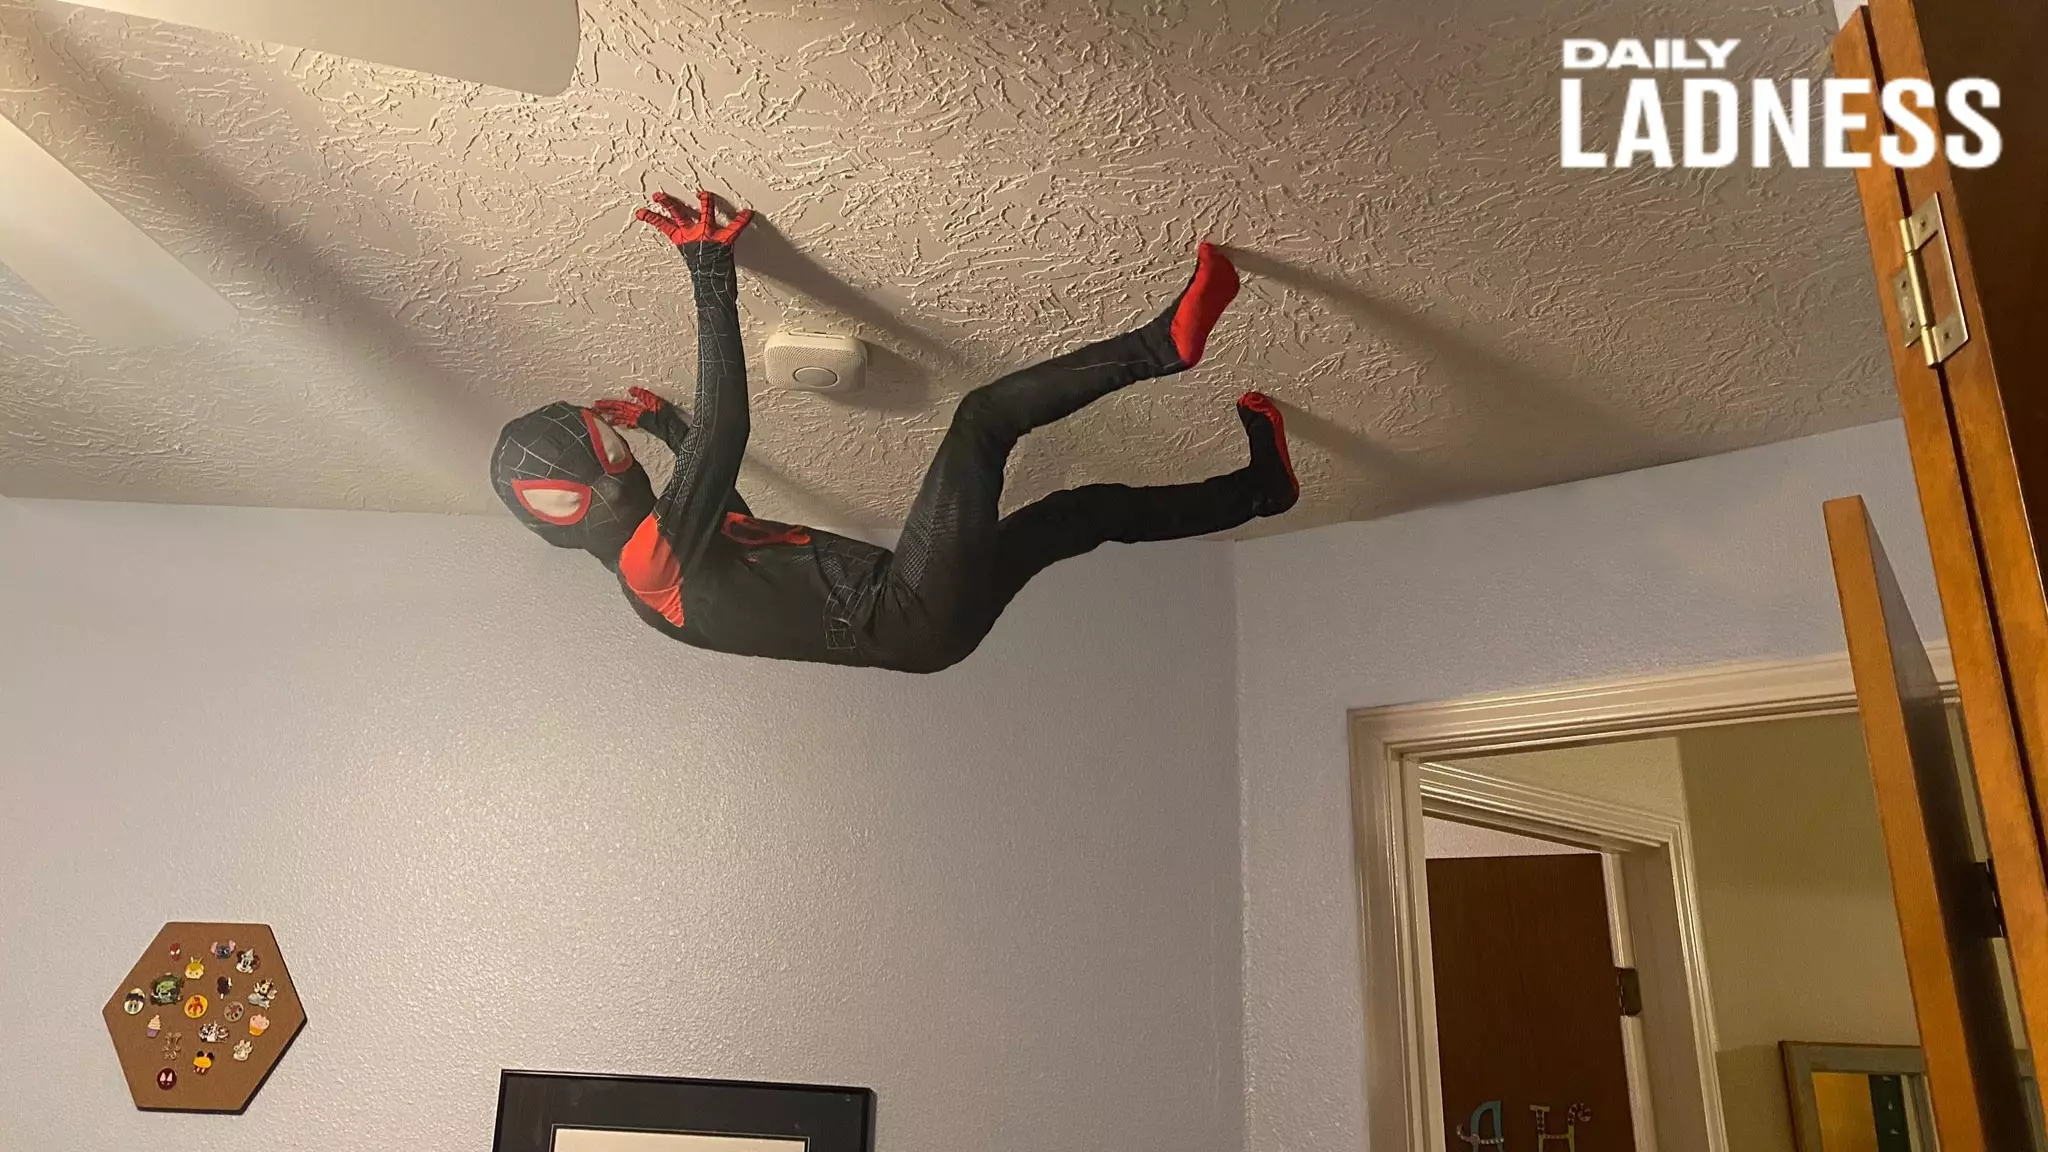 Dad Uses Photoshop To Turn His Son Into Real-Life Spider-Man